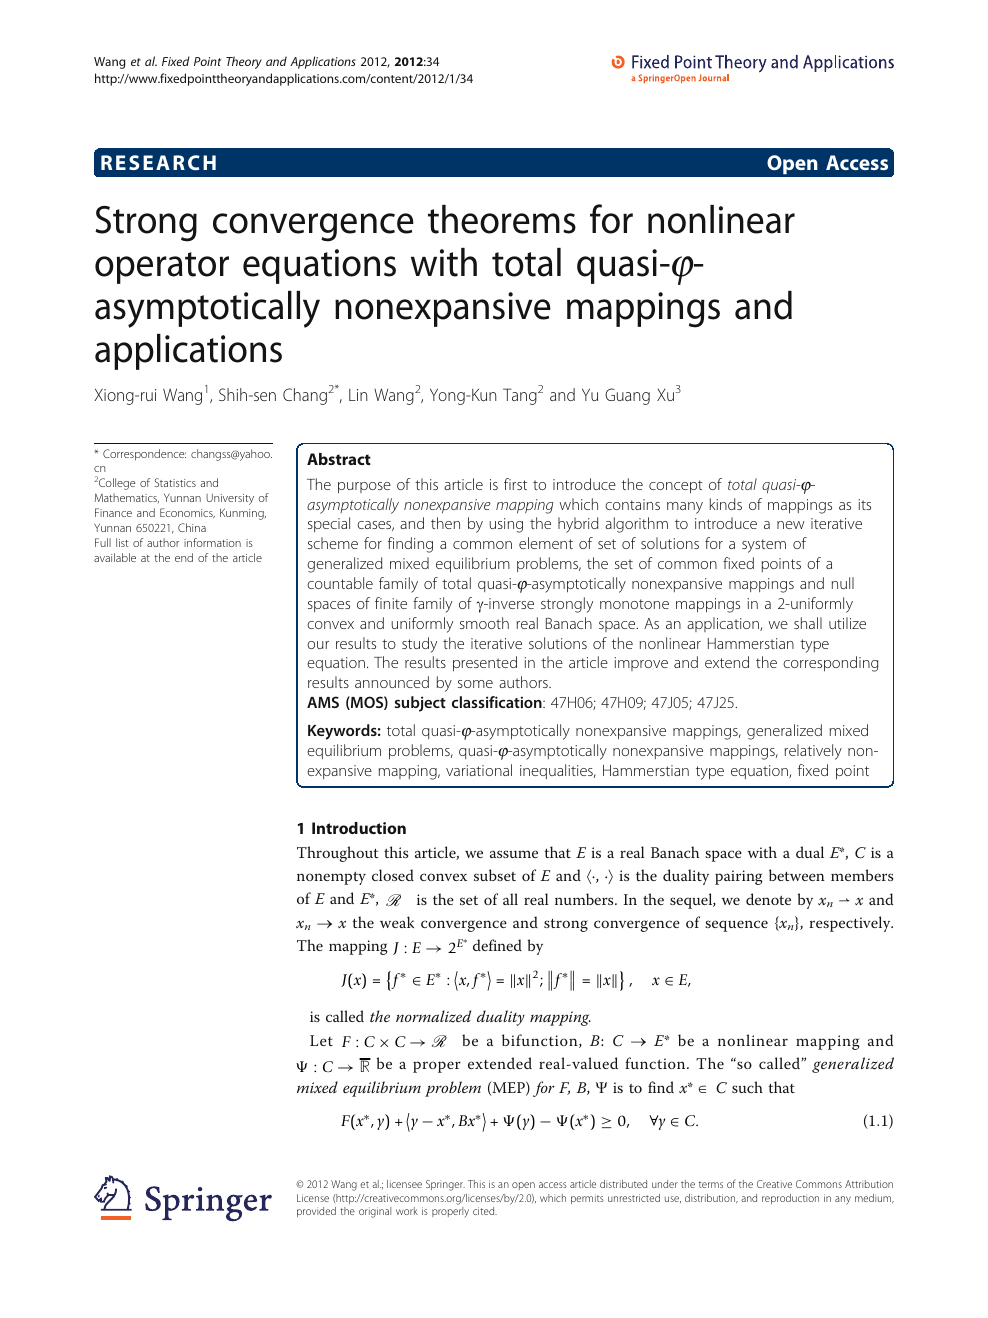 Strong Convergence Theorems For Nonlinear Operator Equations With Total Quasi ϕ Asymptotically Nonexpansive Mappings And Applications Topic Of Research Paper In Mathematics Download Scholarly Article Pdf And Read For Free On Cyberleninka Open